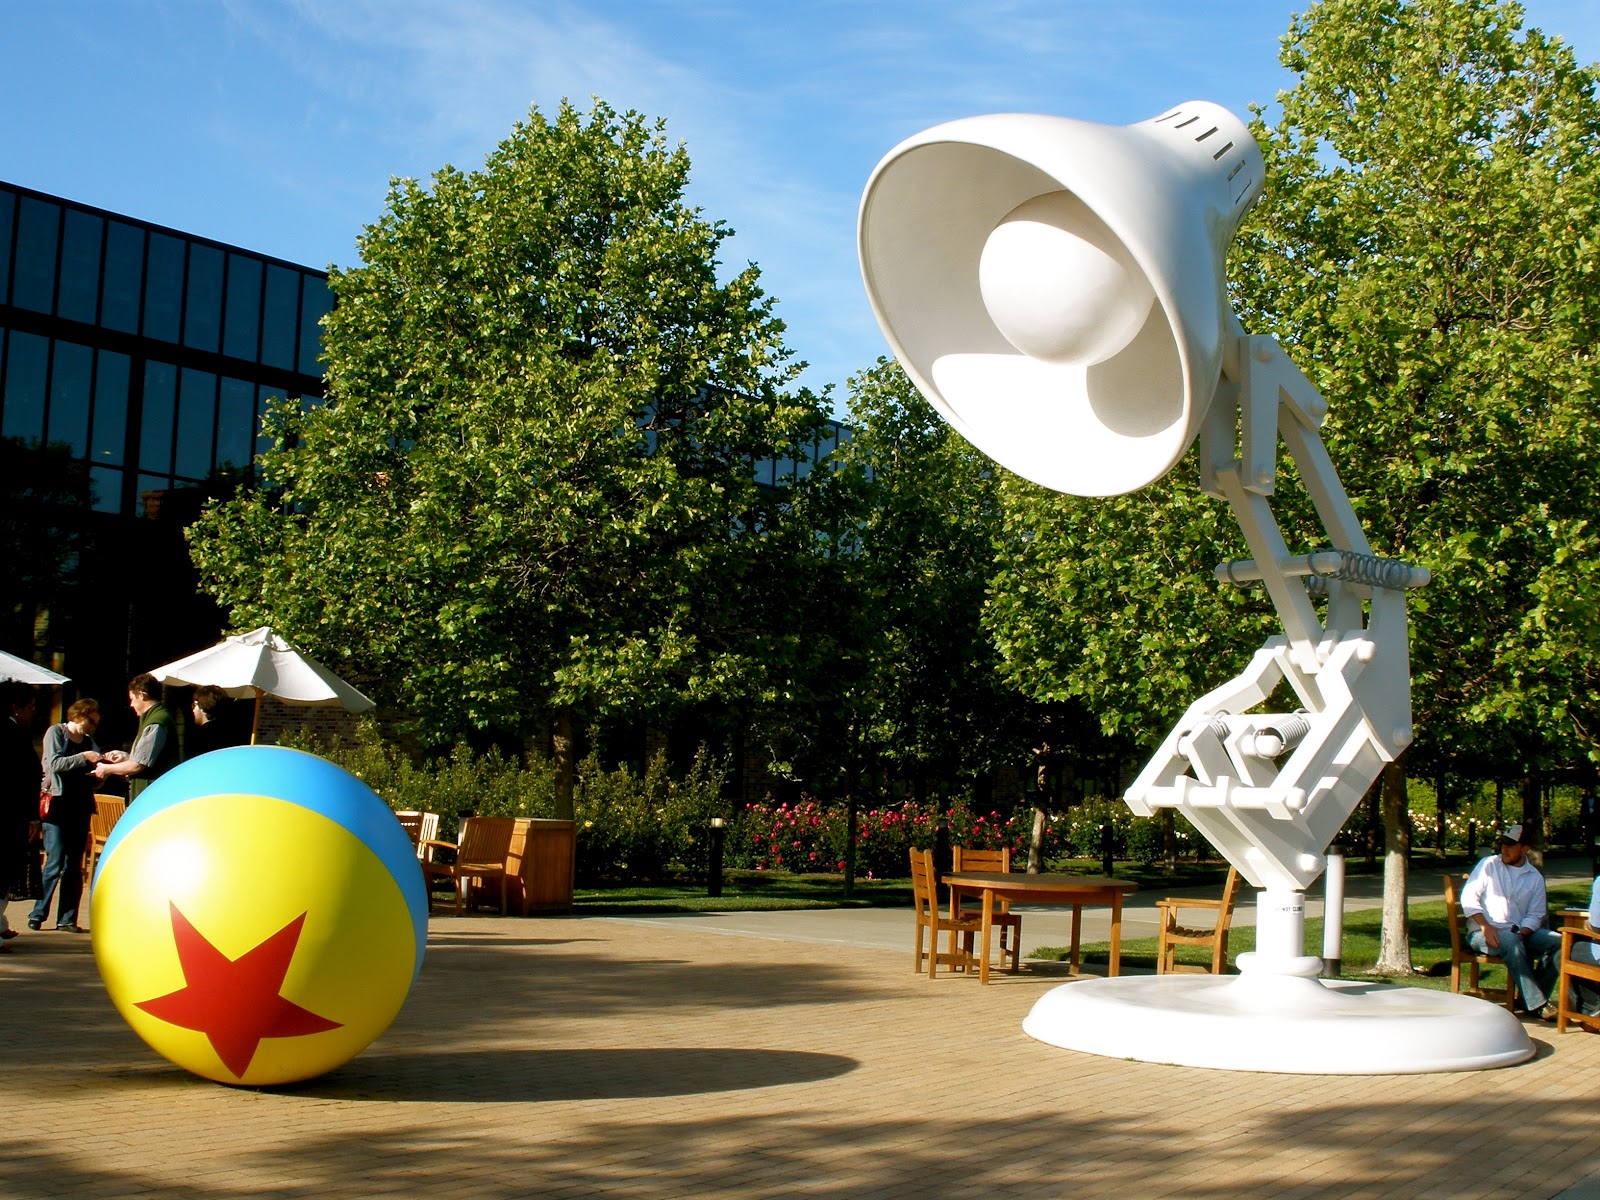 Which Two Pixar Characters Are You A Combo Of? Luxo Ball